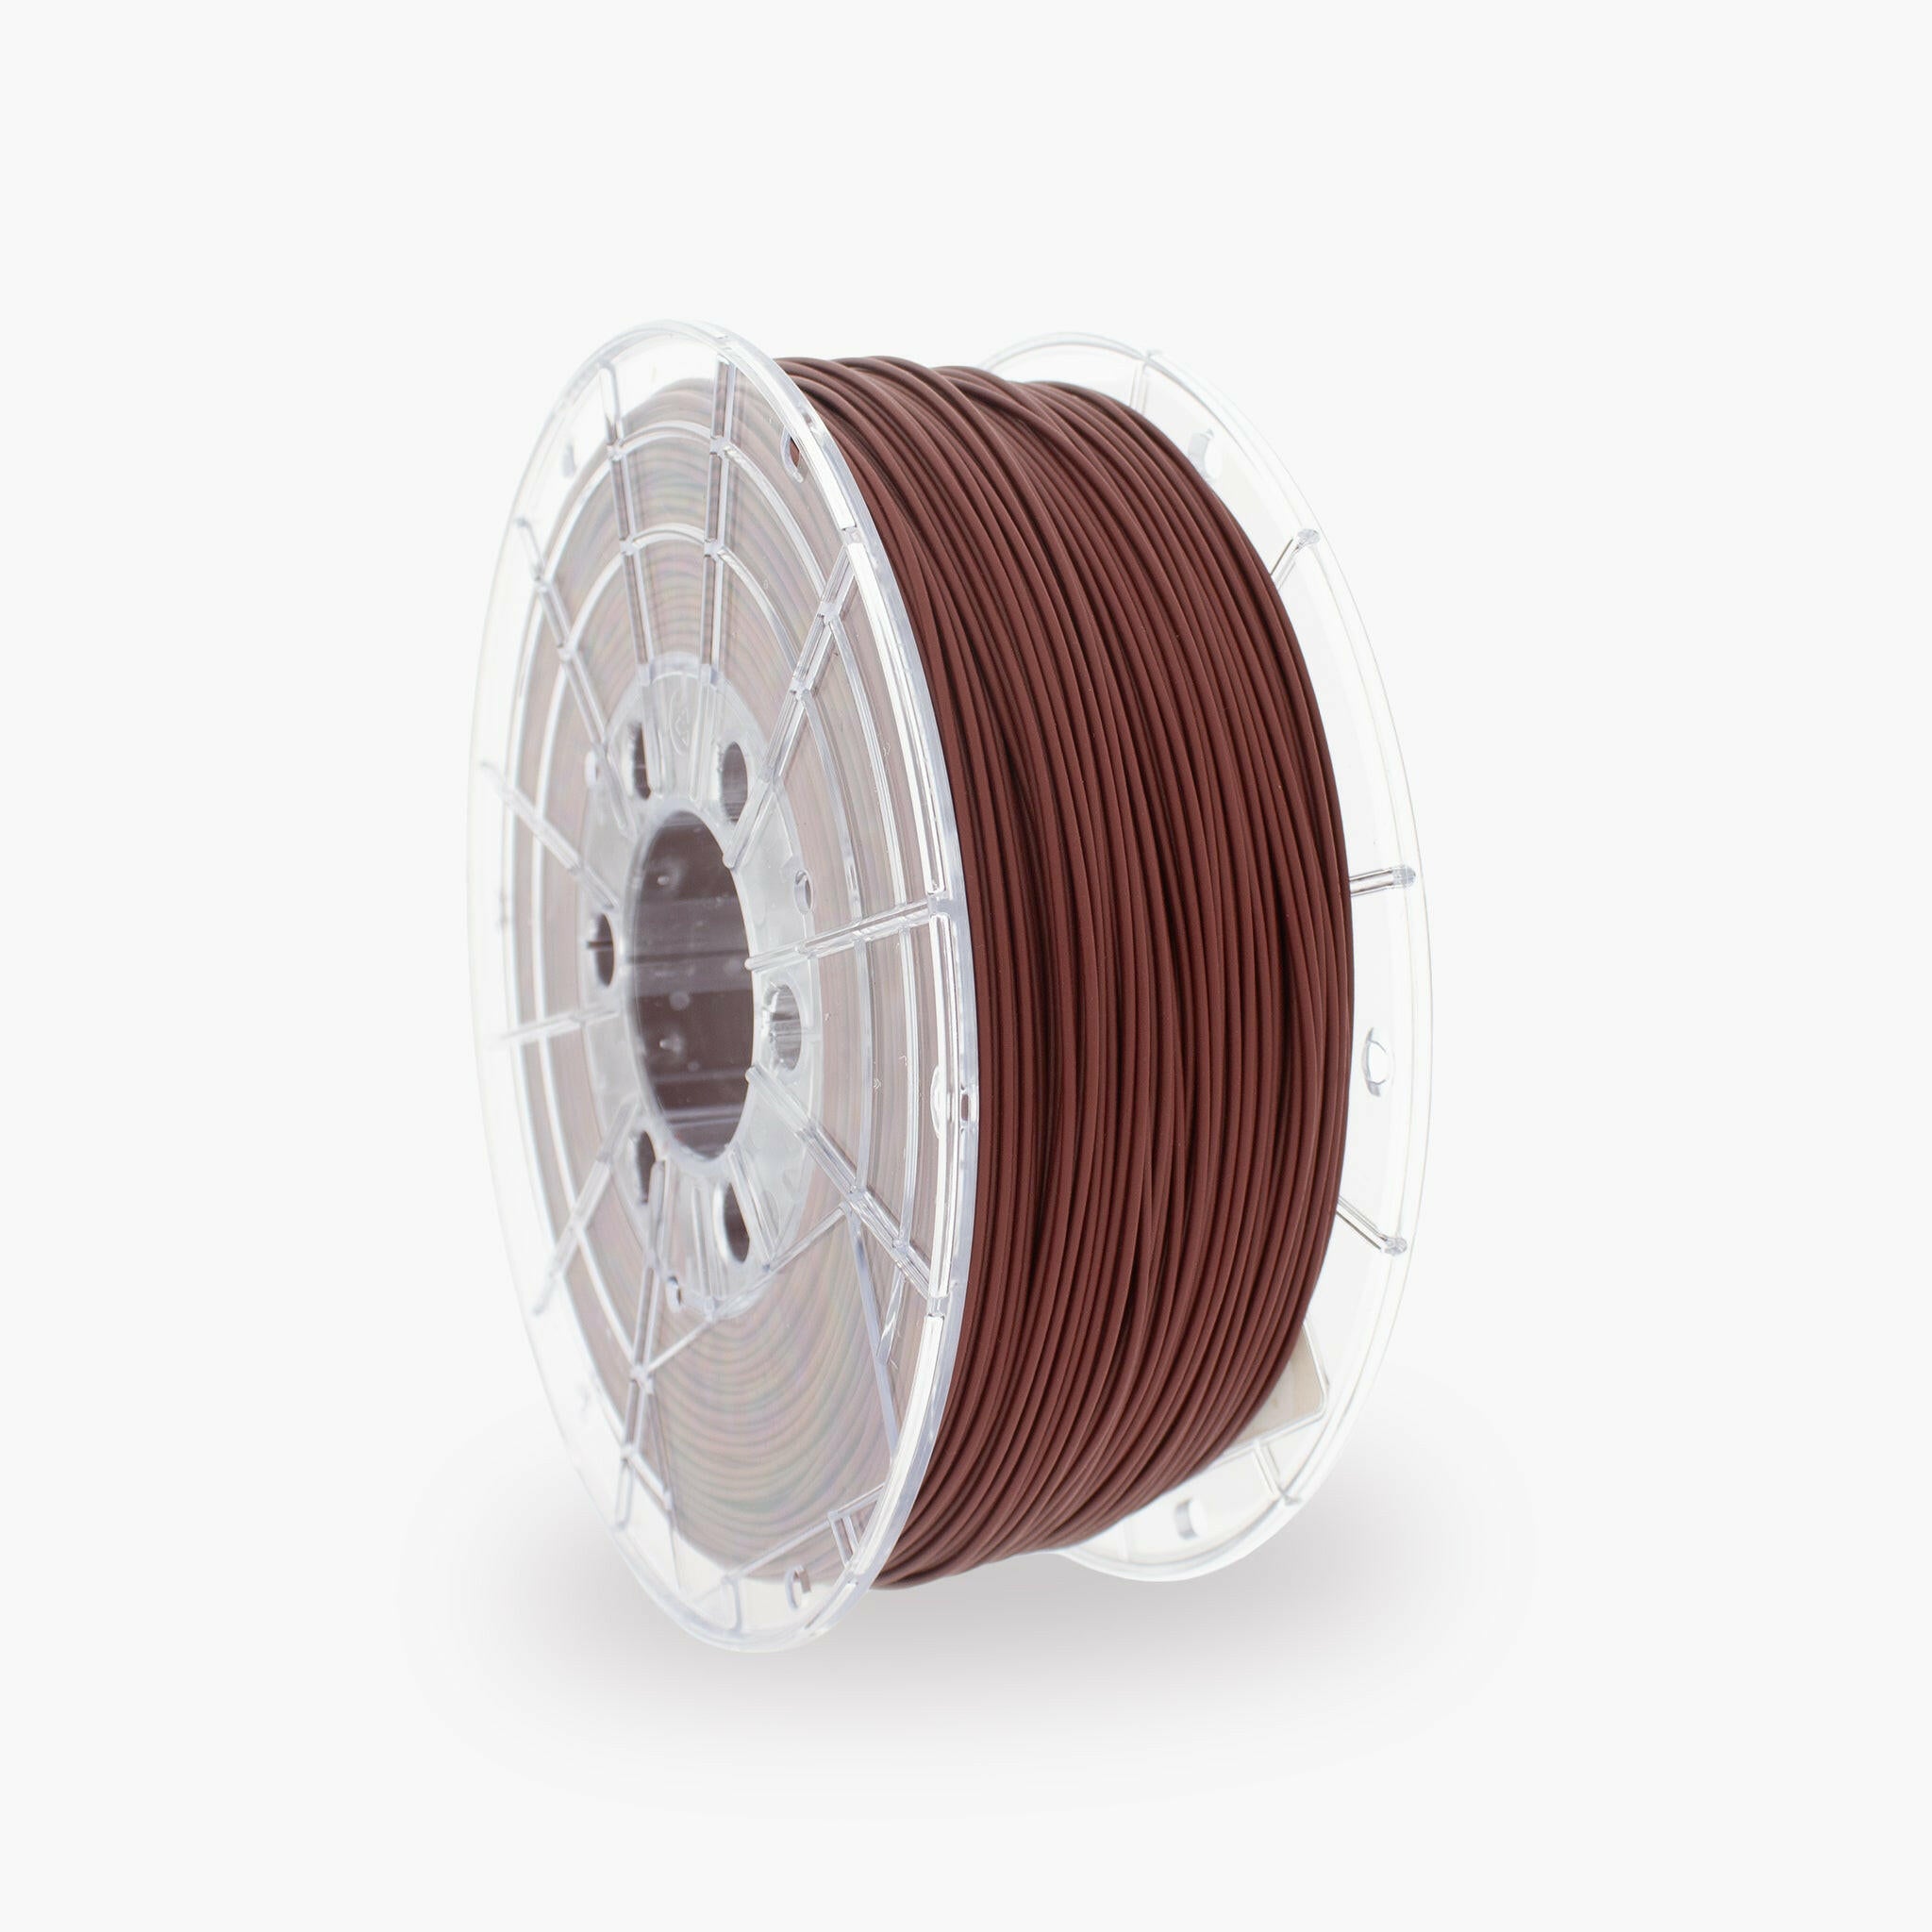 Wine Red PLA 3D Printer Filament with a diameter of 1.75mm on a 1KG Spool.